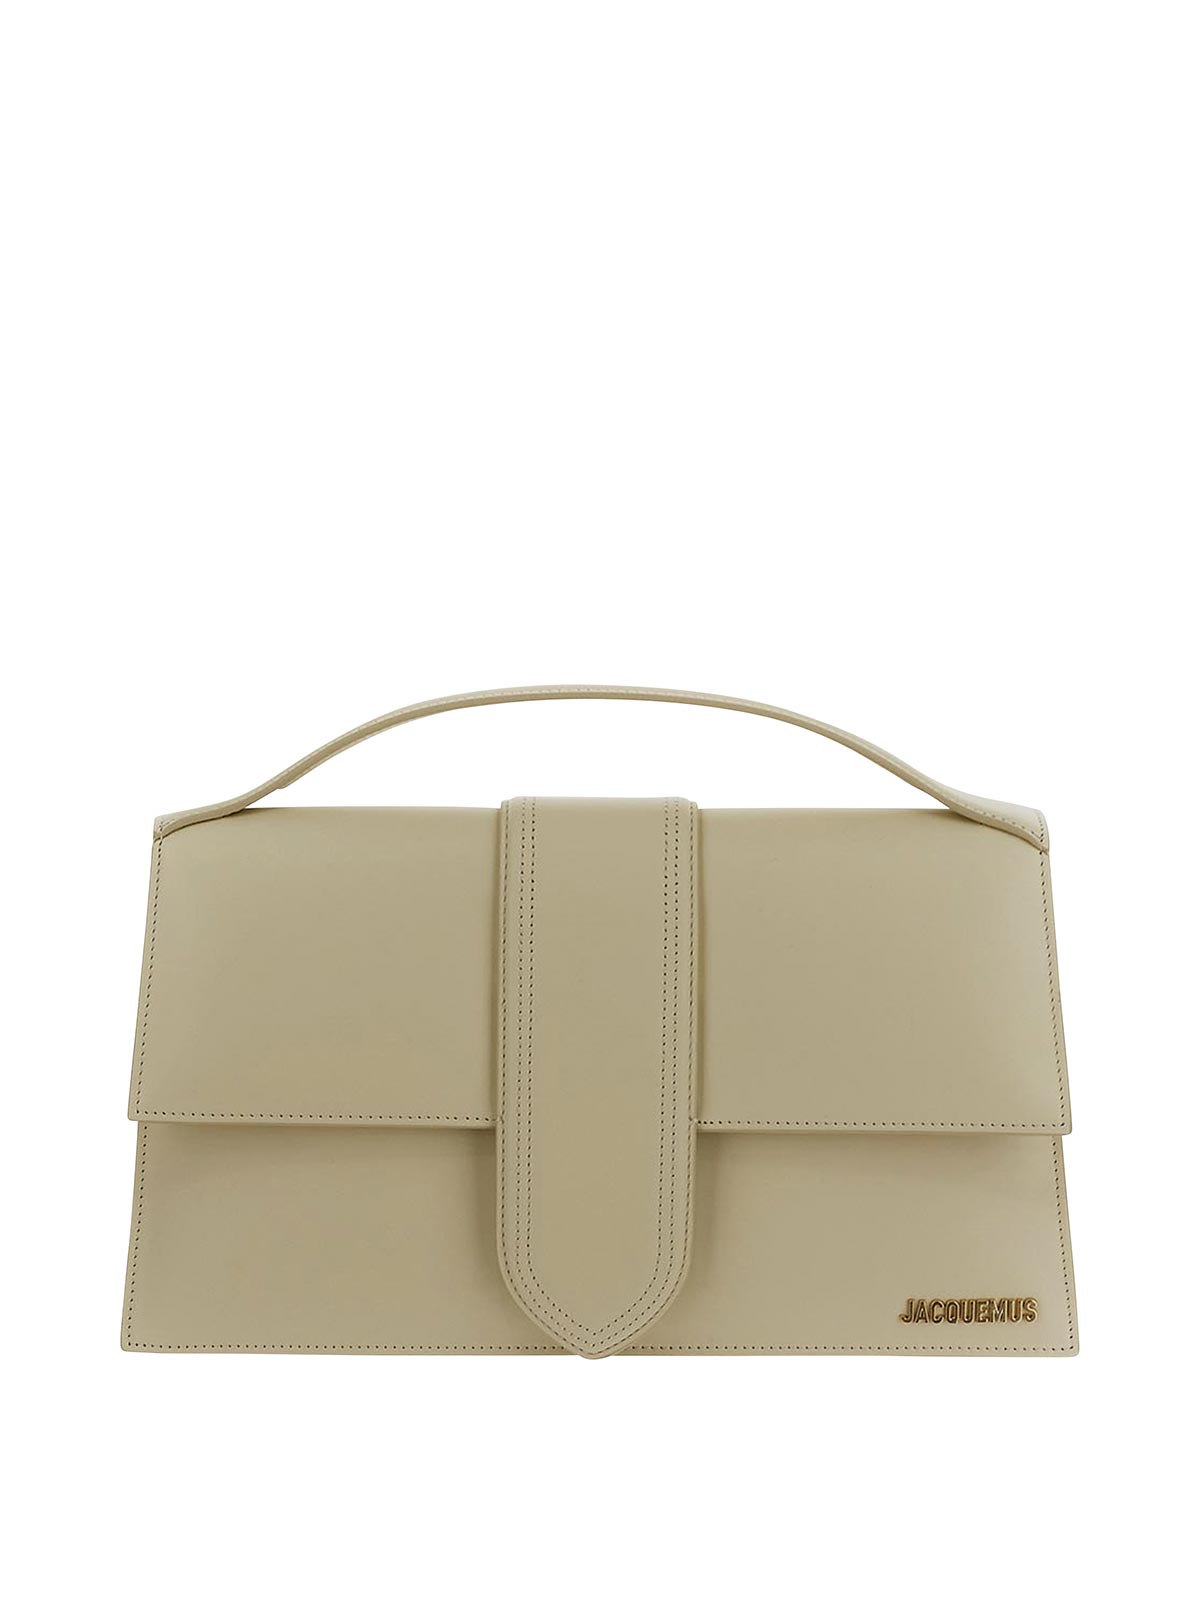 Jacquemus Handbag In Ivory With Finish Logo In White